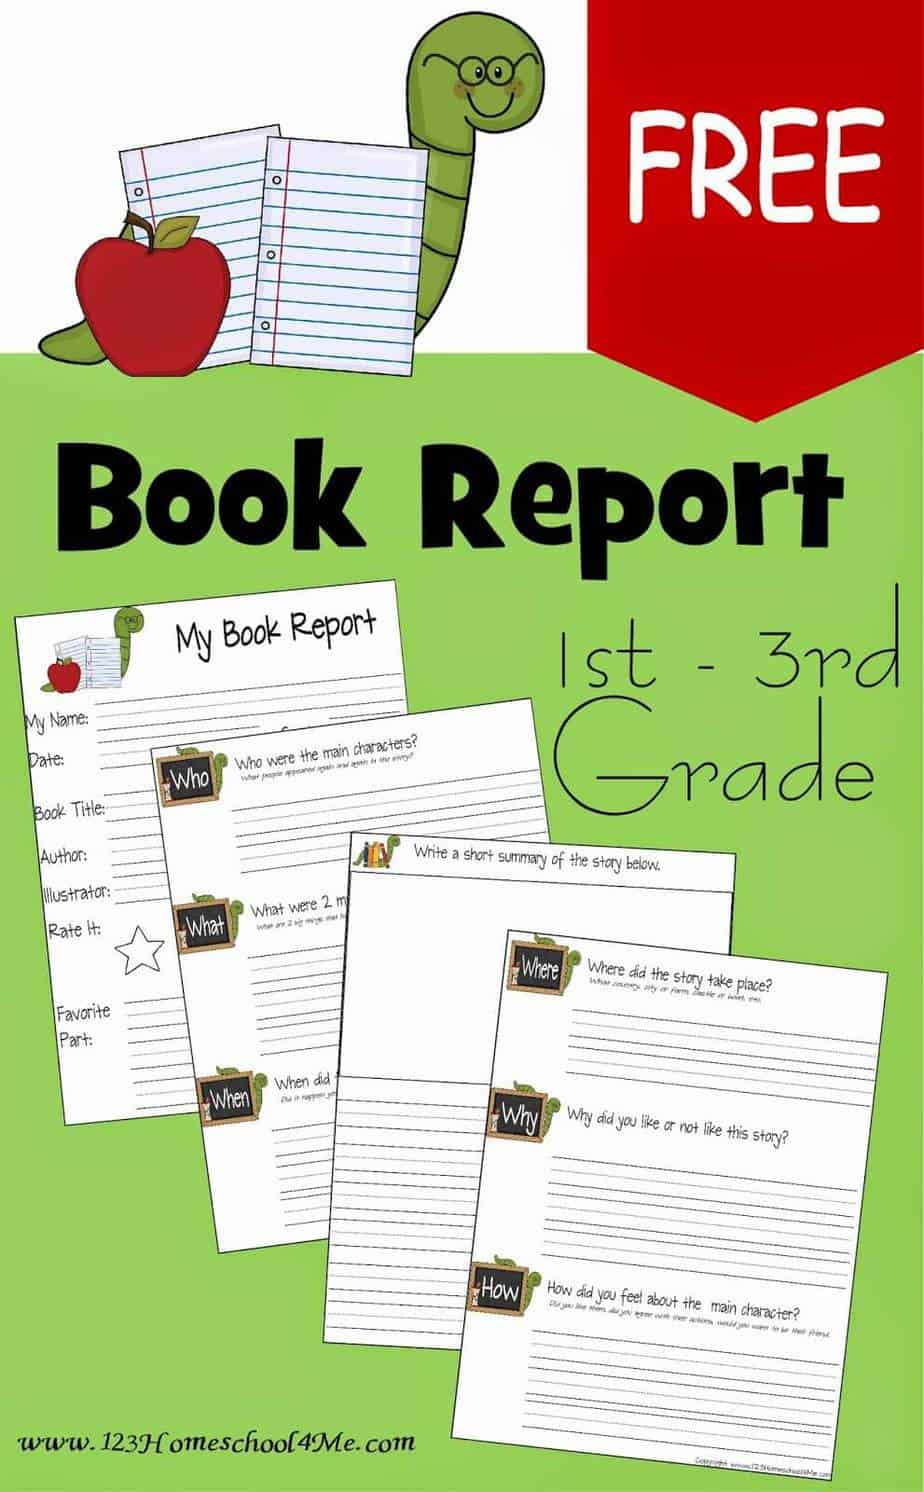 Free Book Report Template | 123 Homeschool 4 Me - Free Printable Book Report Forms